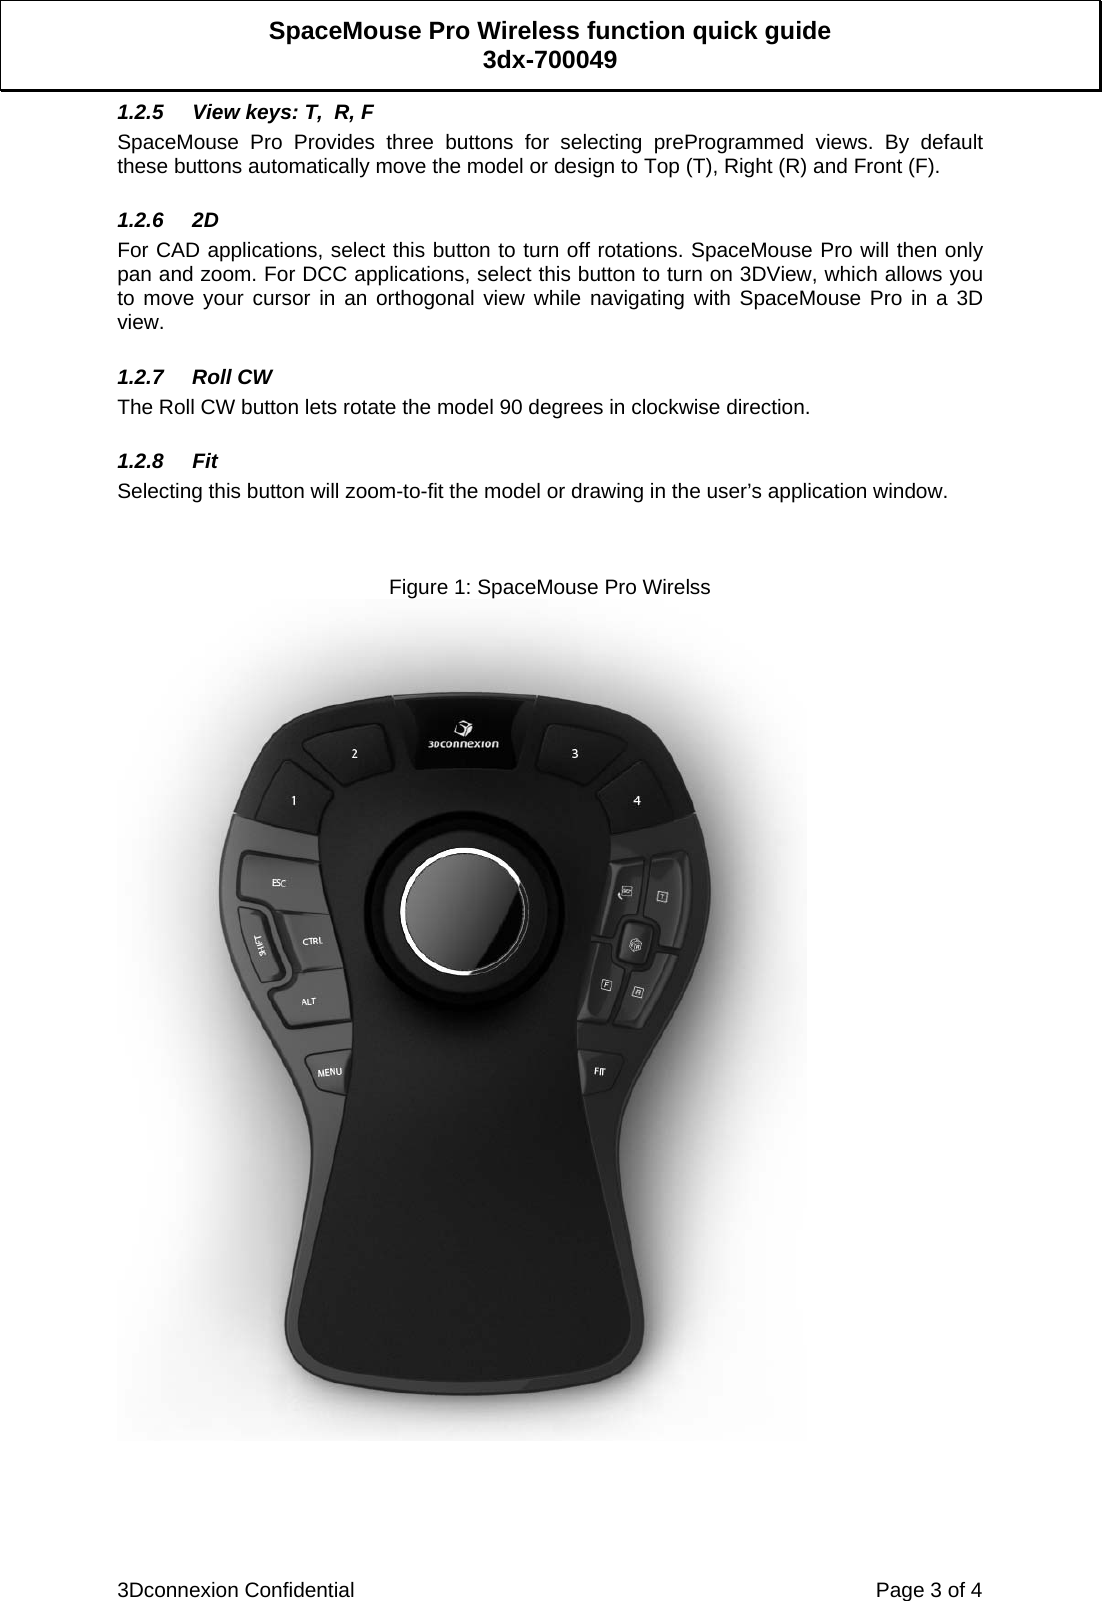  3Dconnexion Confidential    Page 3 of 4 SpaceMouse Pro Wireless function quick guide 3dx-700049 1.2.5  View keys: T,  R, F SpaceMouse Pro Provides three buttons for selecting preProgrammed views. By default these buttons automatically move the model or design to Top (T), Right (R) and Front (F).  1.2.6 2D For CAD applications, select this button to turn off rotations. SpaceMouse Pro will then only pan and zoom. For DCC applications, select this button to turn on 3DView, which allows you to move your cursor in an orthogonal view while navigating with SpaceMouse Pro in a 3D view.  1.2.7 Roll CW The Roll CW button lets rotate the model 90 degrees in clockwise direction.  1.2.8 Fit Selecting this button will zoom-to-fit the model or drawing in the user’s application window.    Figure 1: SpaceMouse Pro Wirelss     